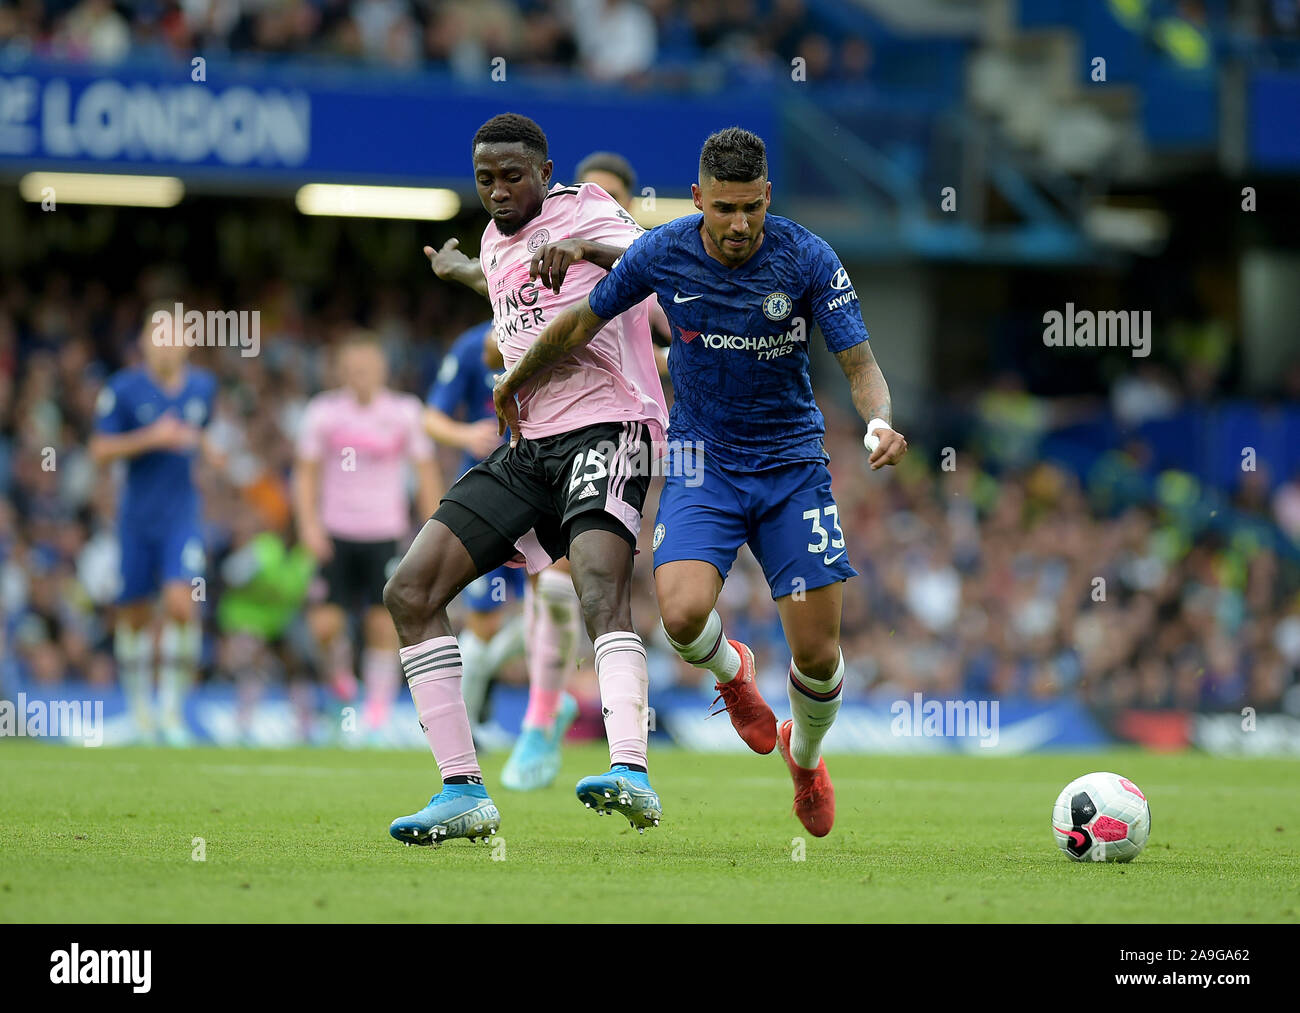 Emerson Palmieri of Chelsea clashes with Wilfred Ndidi of Leicester City during the Chelsea vs Leicester City Premier League match at Stamford Bridge Stock Photo